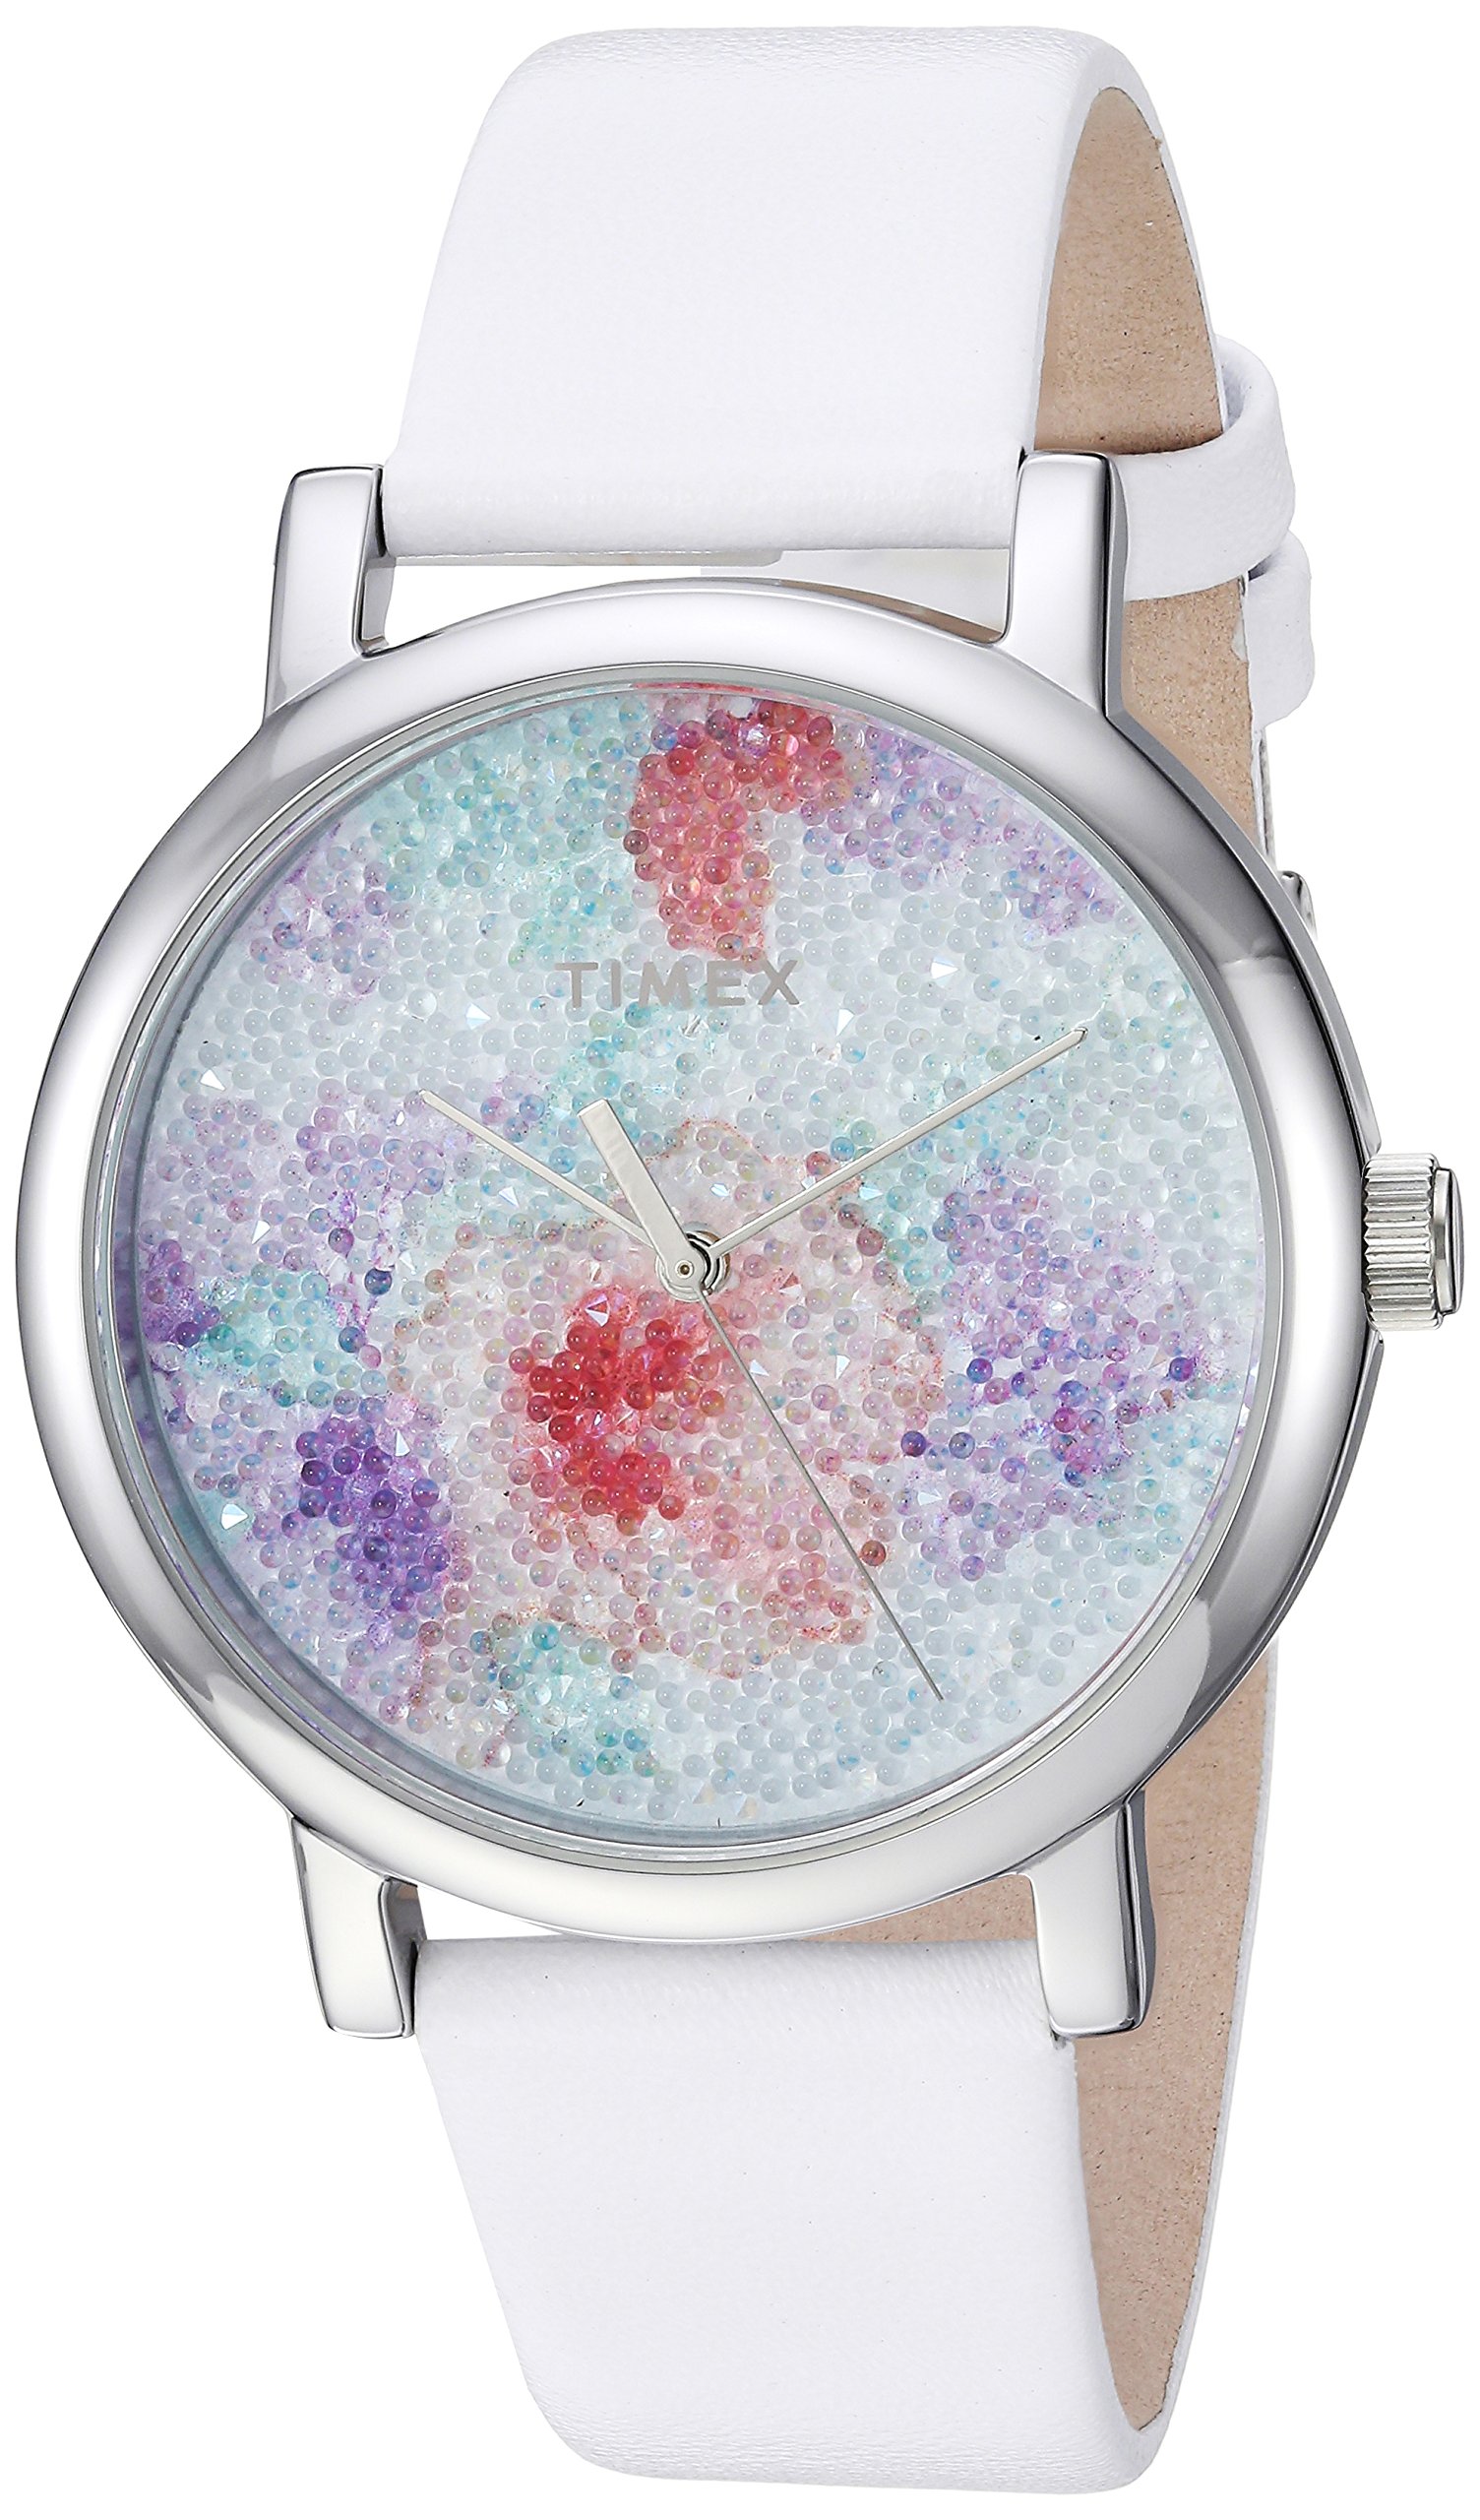 Timex Womens Crystal Bloom White/Silver Floral Leather Strap Watch TW2R66500